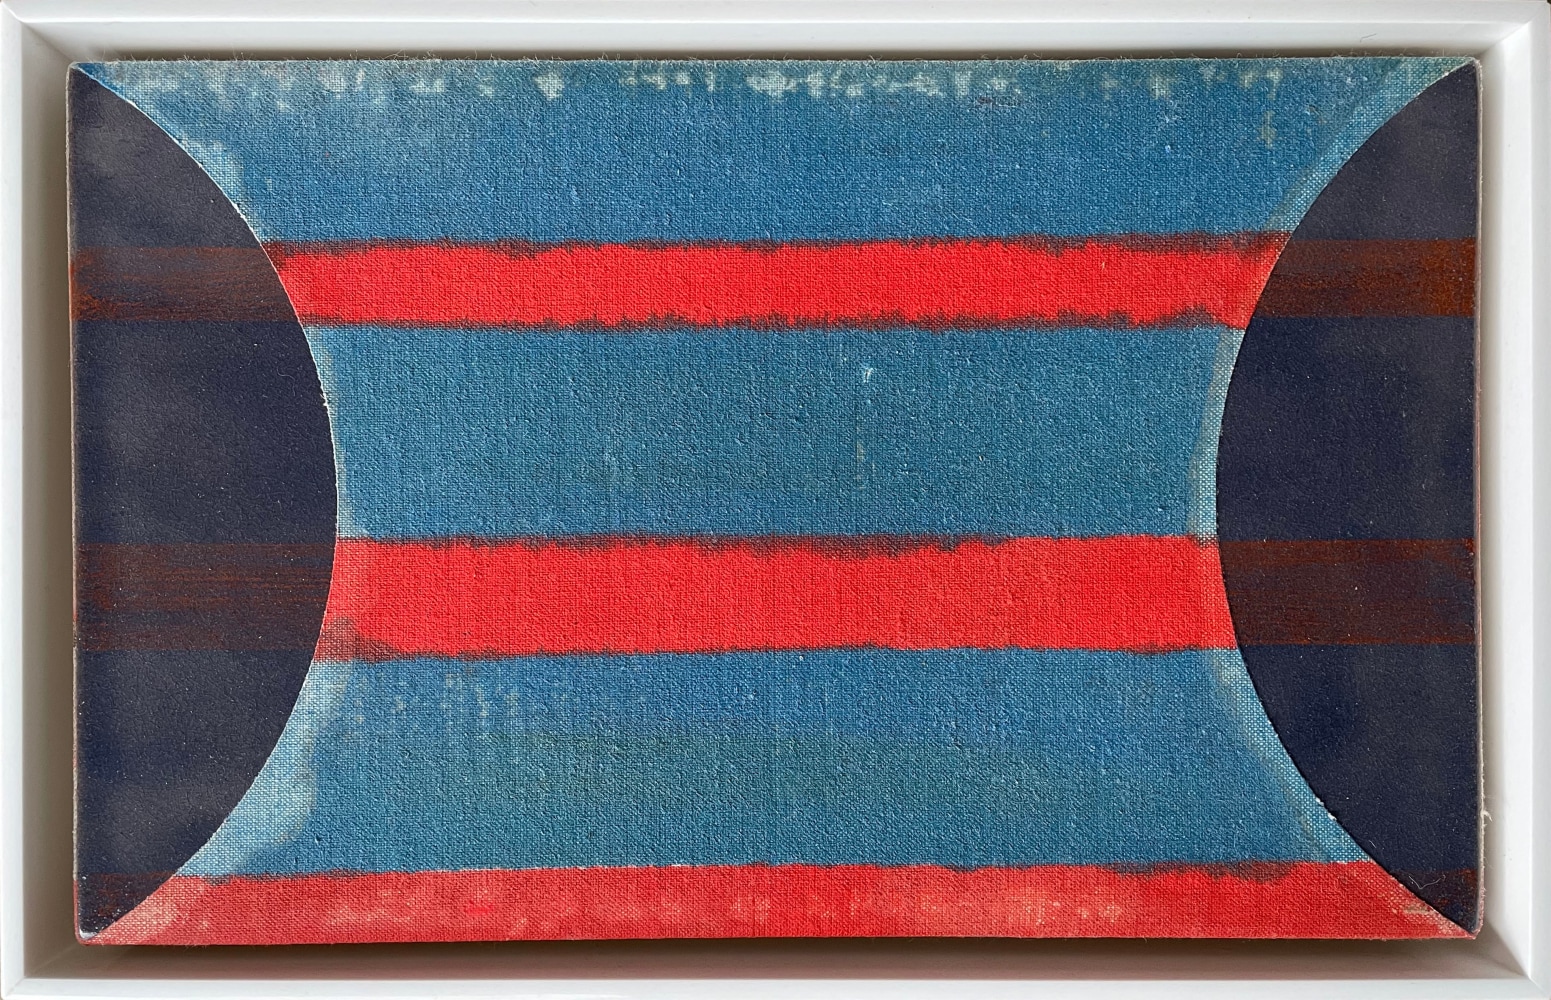 Frank.Olt.Untitled.Encaustic.on.Canvas.with.Ceramic.blue.and.red.stripe